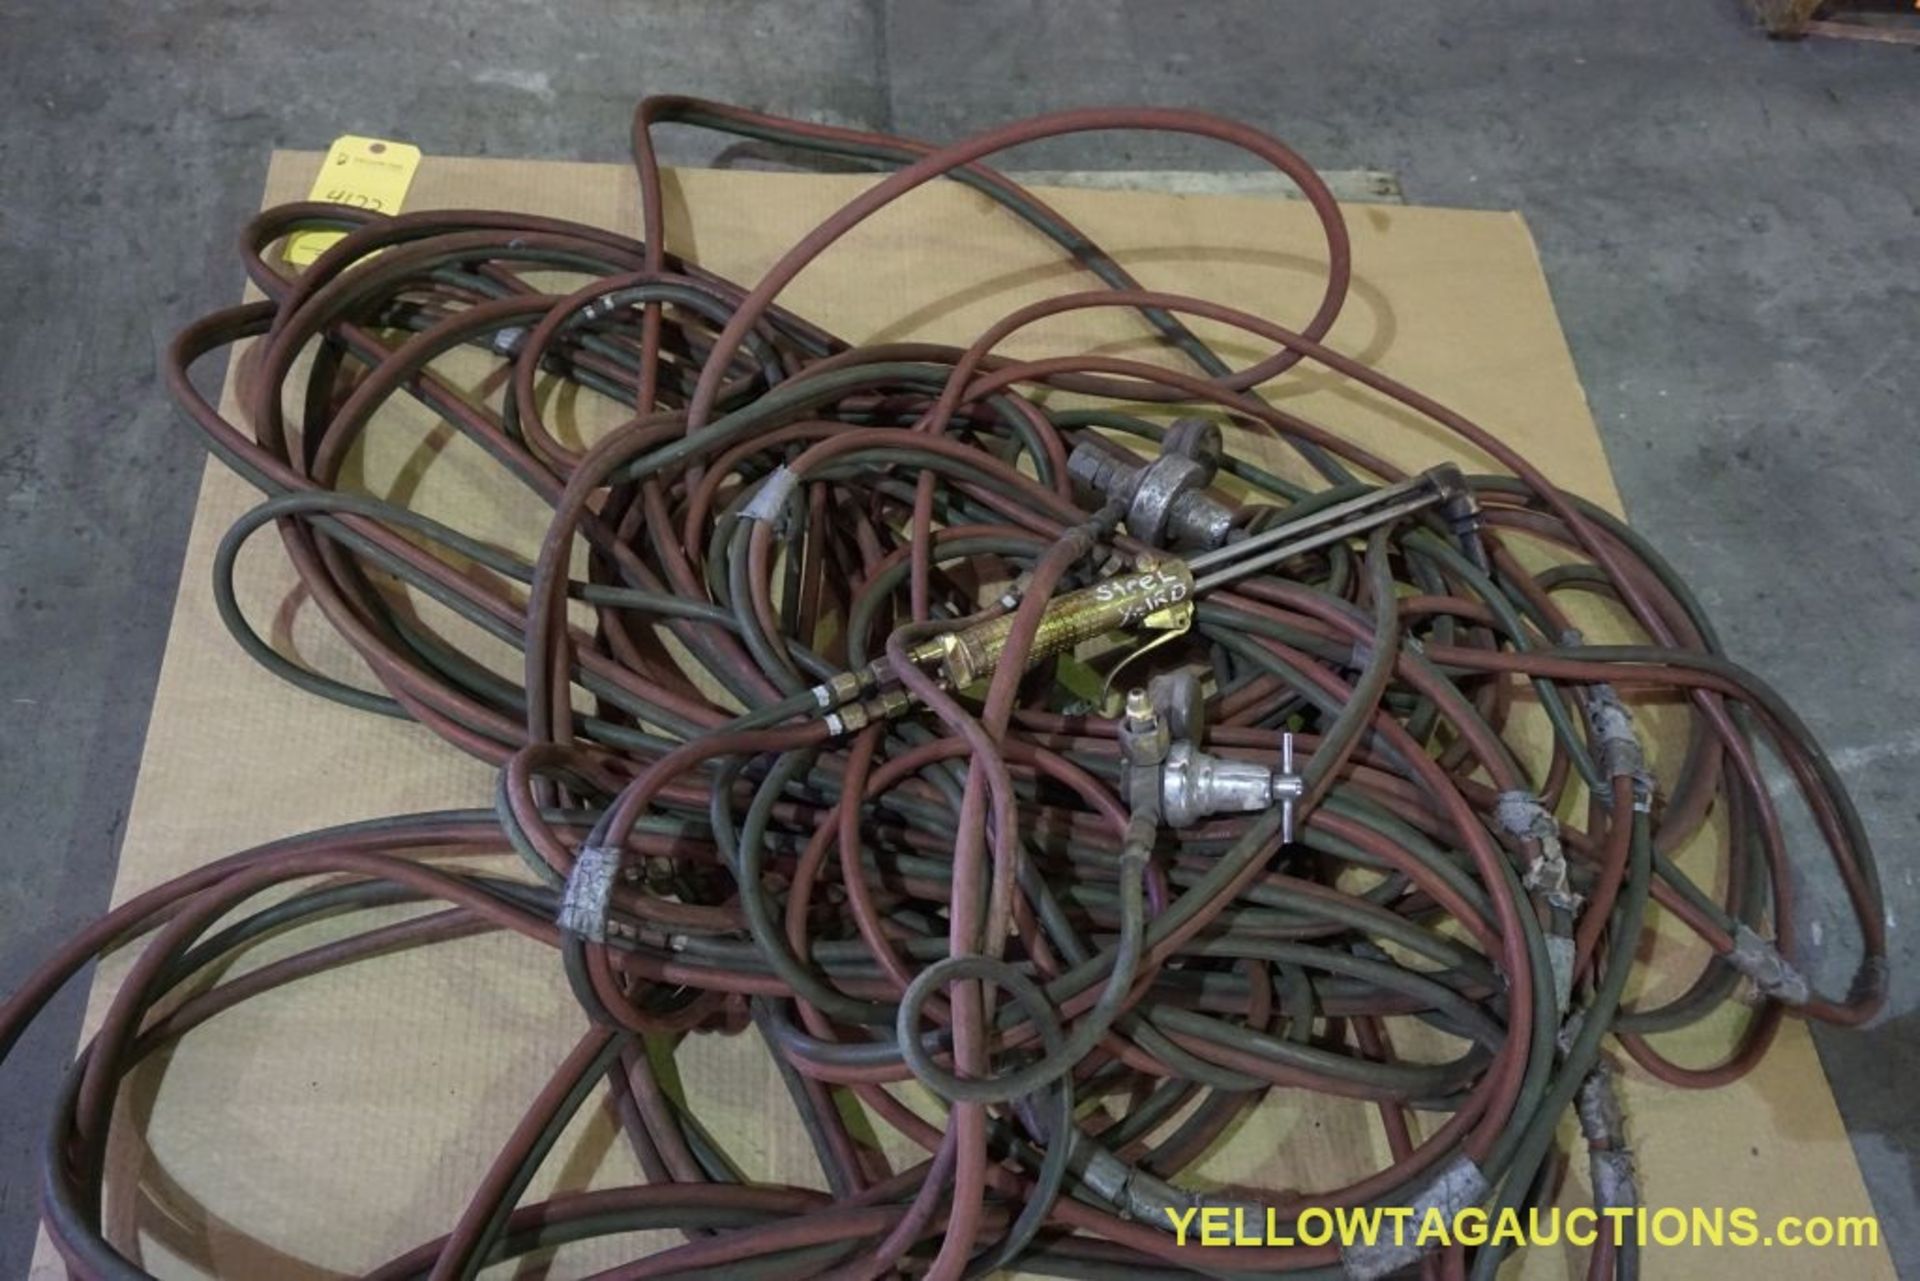 Lot of Assorted Welding Hose - Image 6 of 6